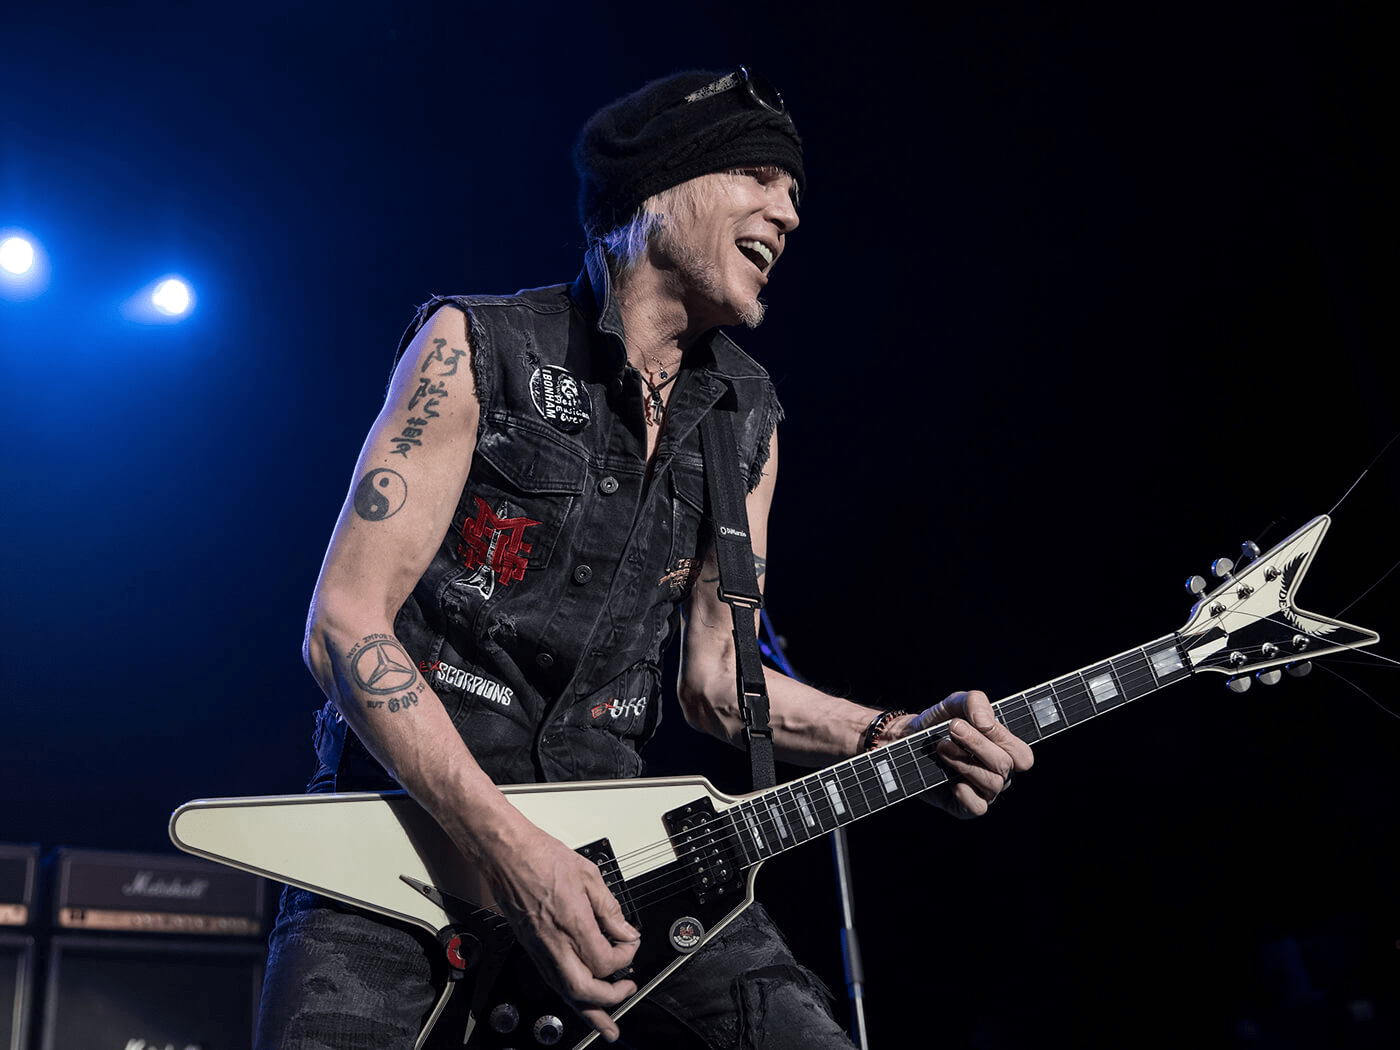 Legendary guitarist Michael Schenker joins Nestor on eve of MSG tour stop at The Fillmore to discuss legend of UFO and The Scorpions in Germany. Baltimore Positive WNST